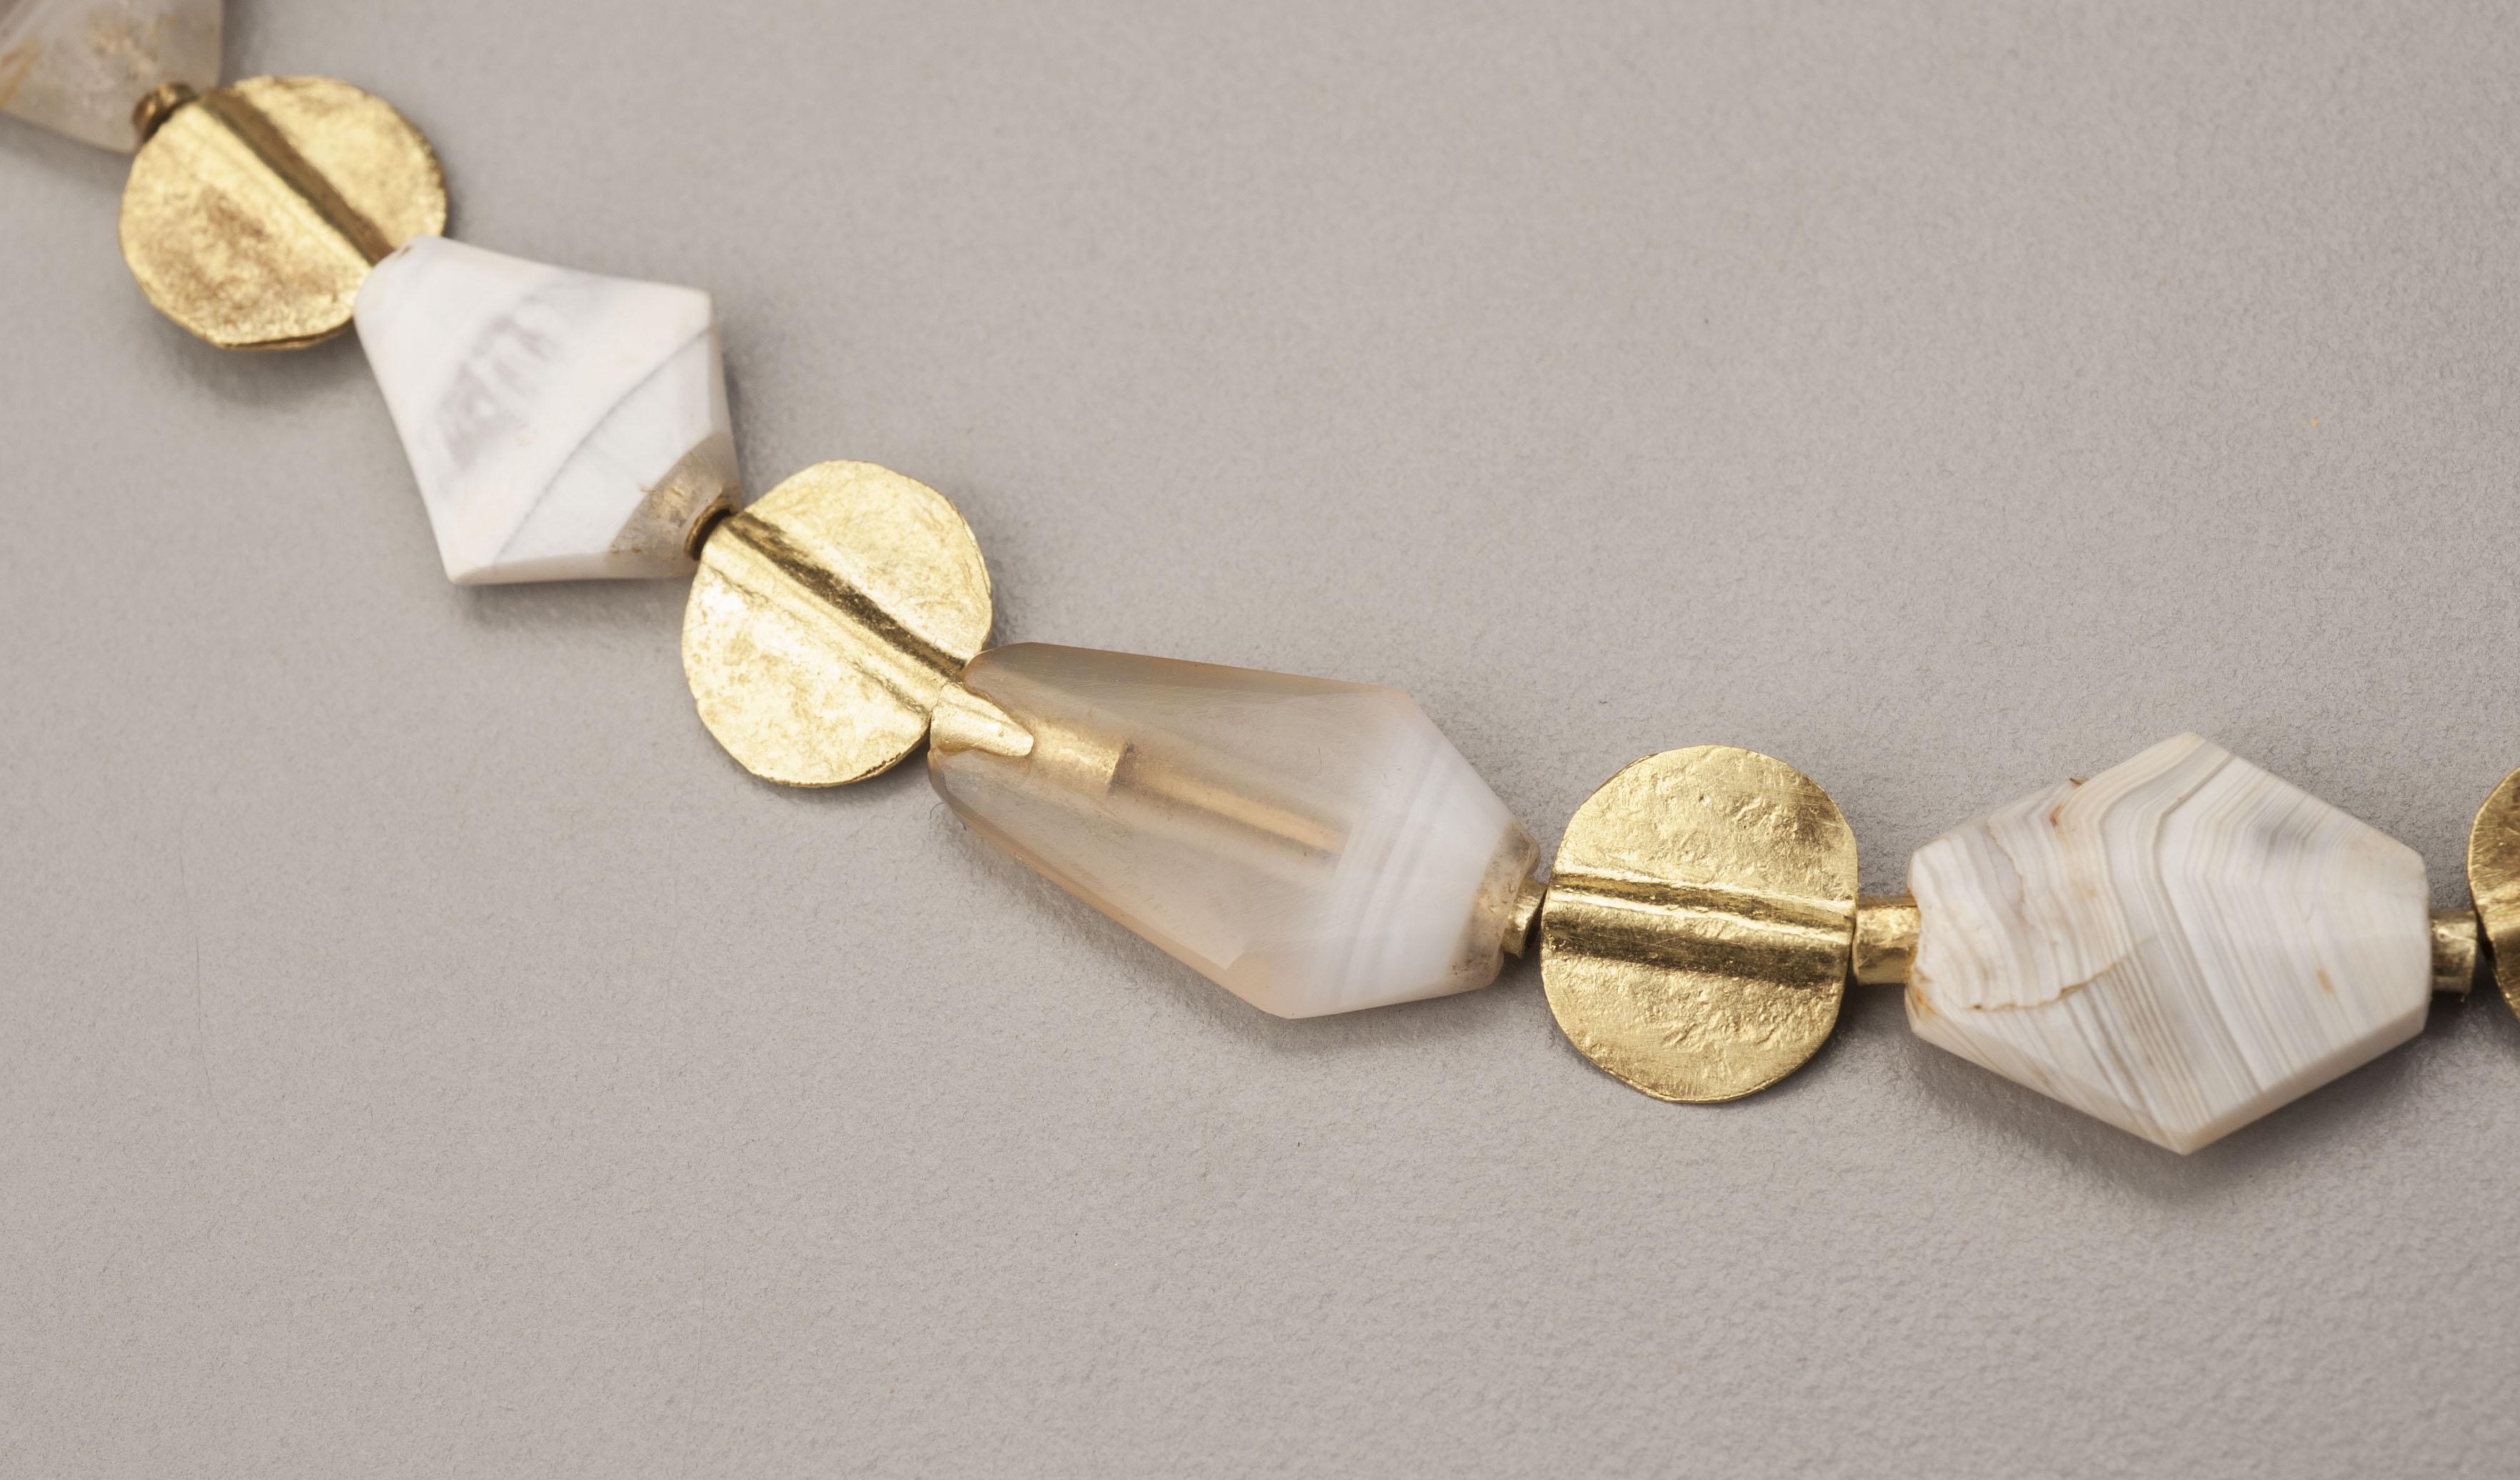 Twenty-seven quartz rhomboid tabular beads alternating with 20k gold “winged“ disc tabular beads. Gold beading tips and a hook and eye clasp complete the necklace. The winged discs are 7.5 mm in length and 9.2 mm in width in the center and graduate